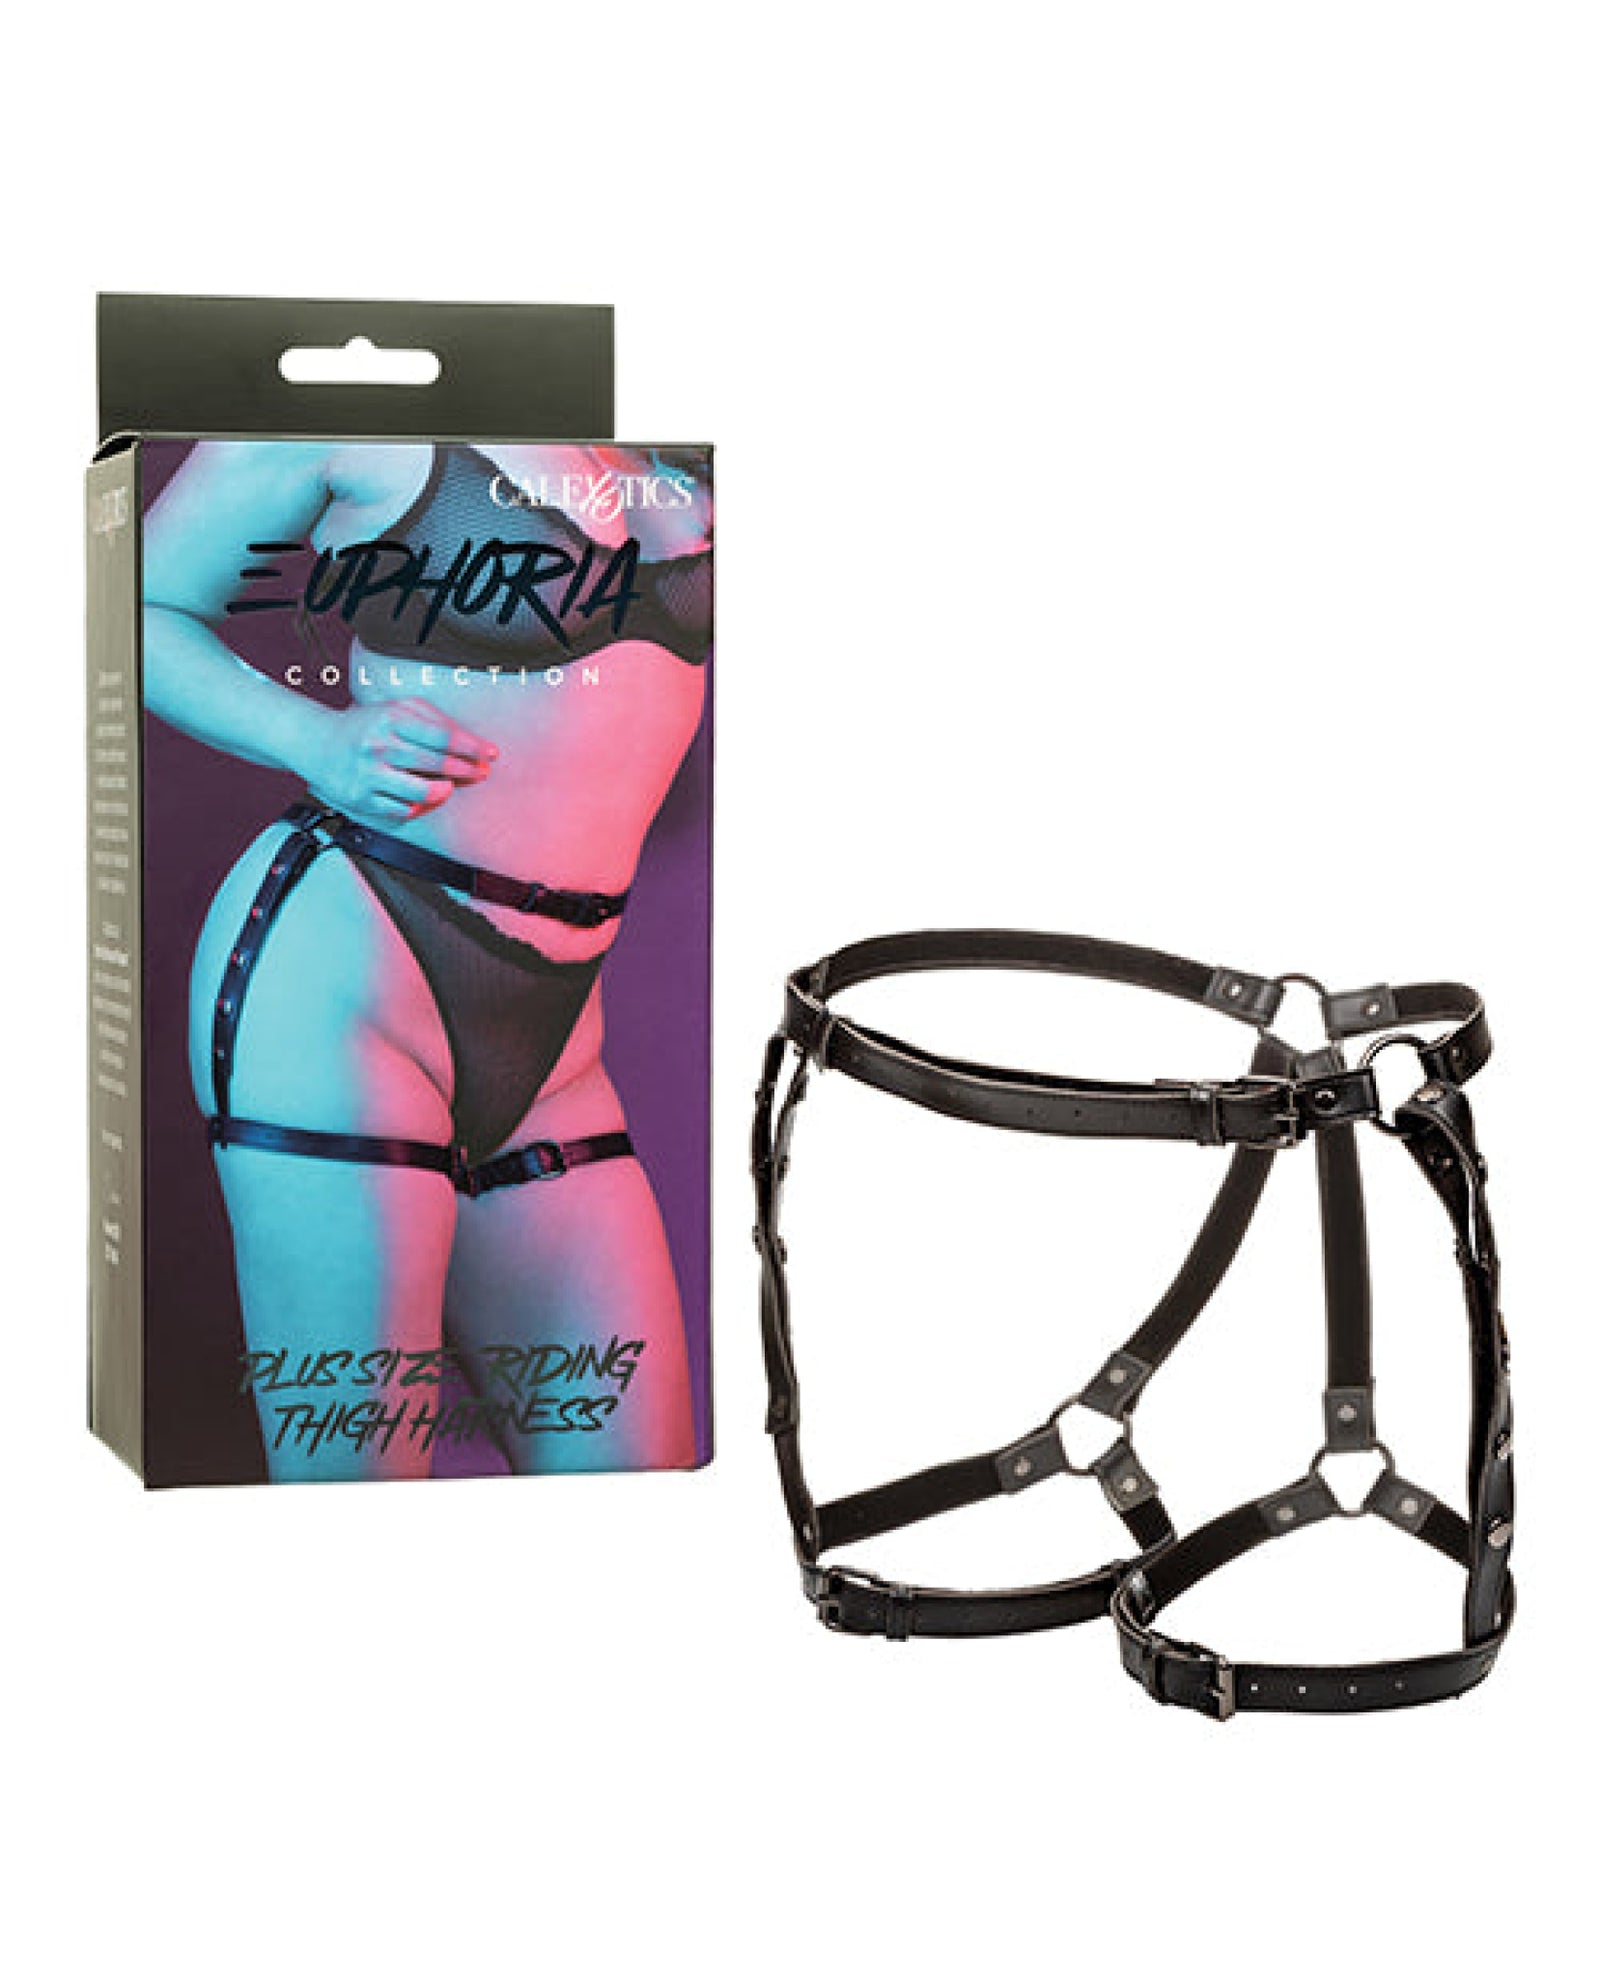 Euphoria Collection Plus Size Riding Thigh Harness California Exotic Novelties